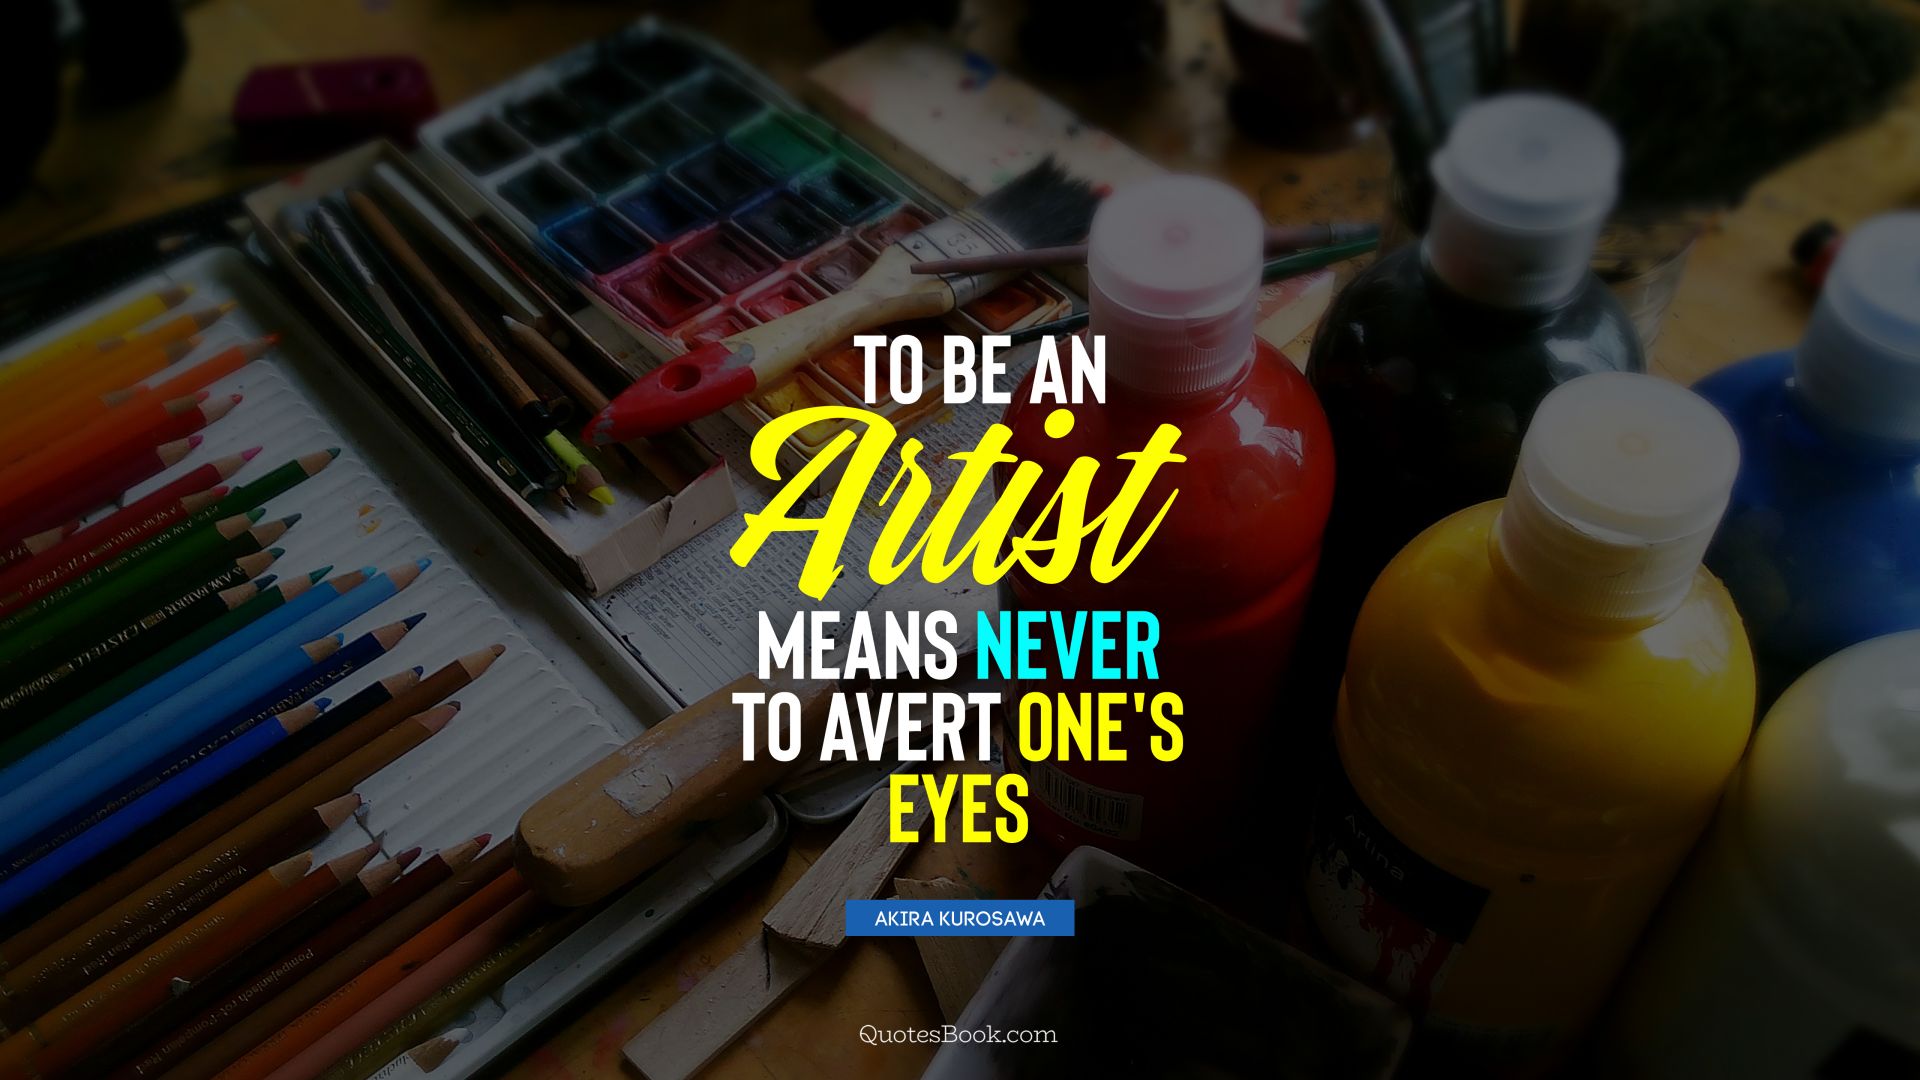 To be an artist means never to avert one's eyes. - Quote by Akira Kurosawa